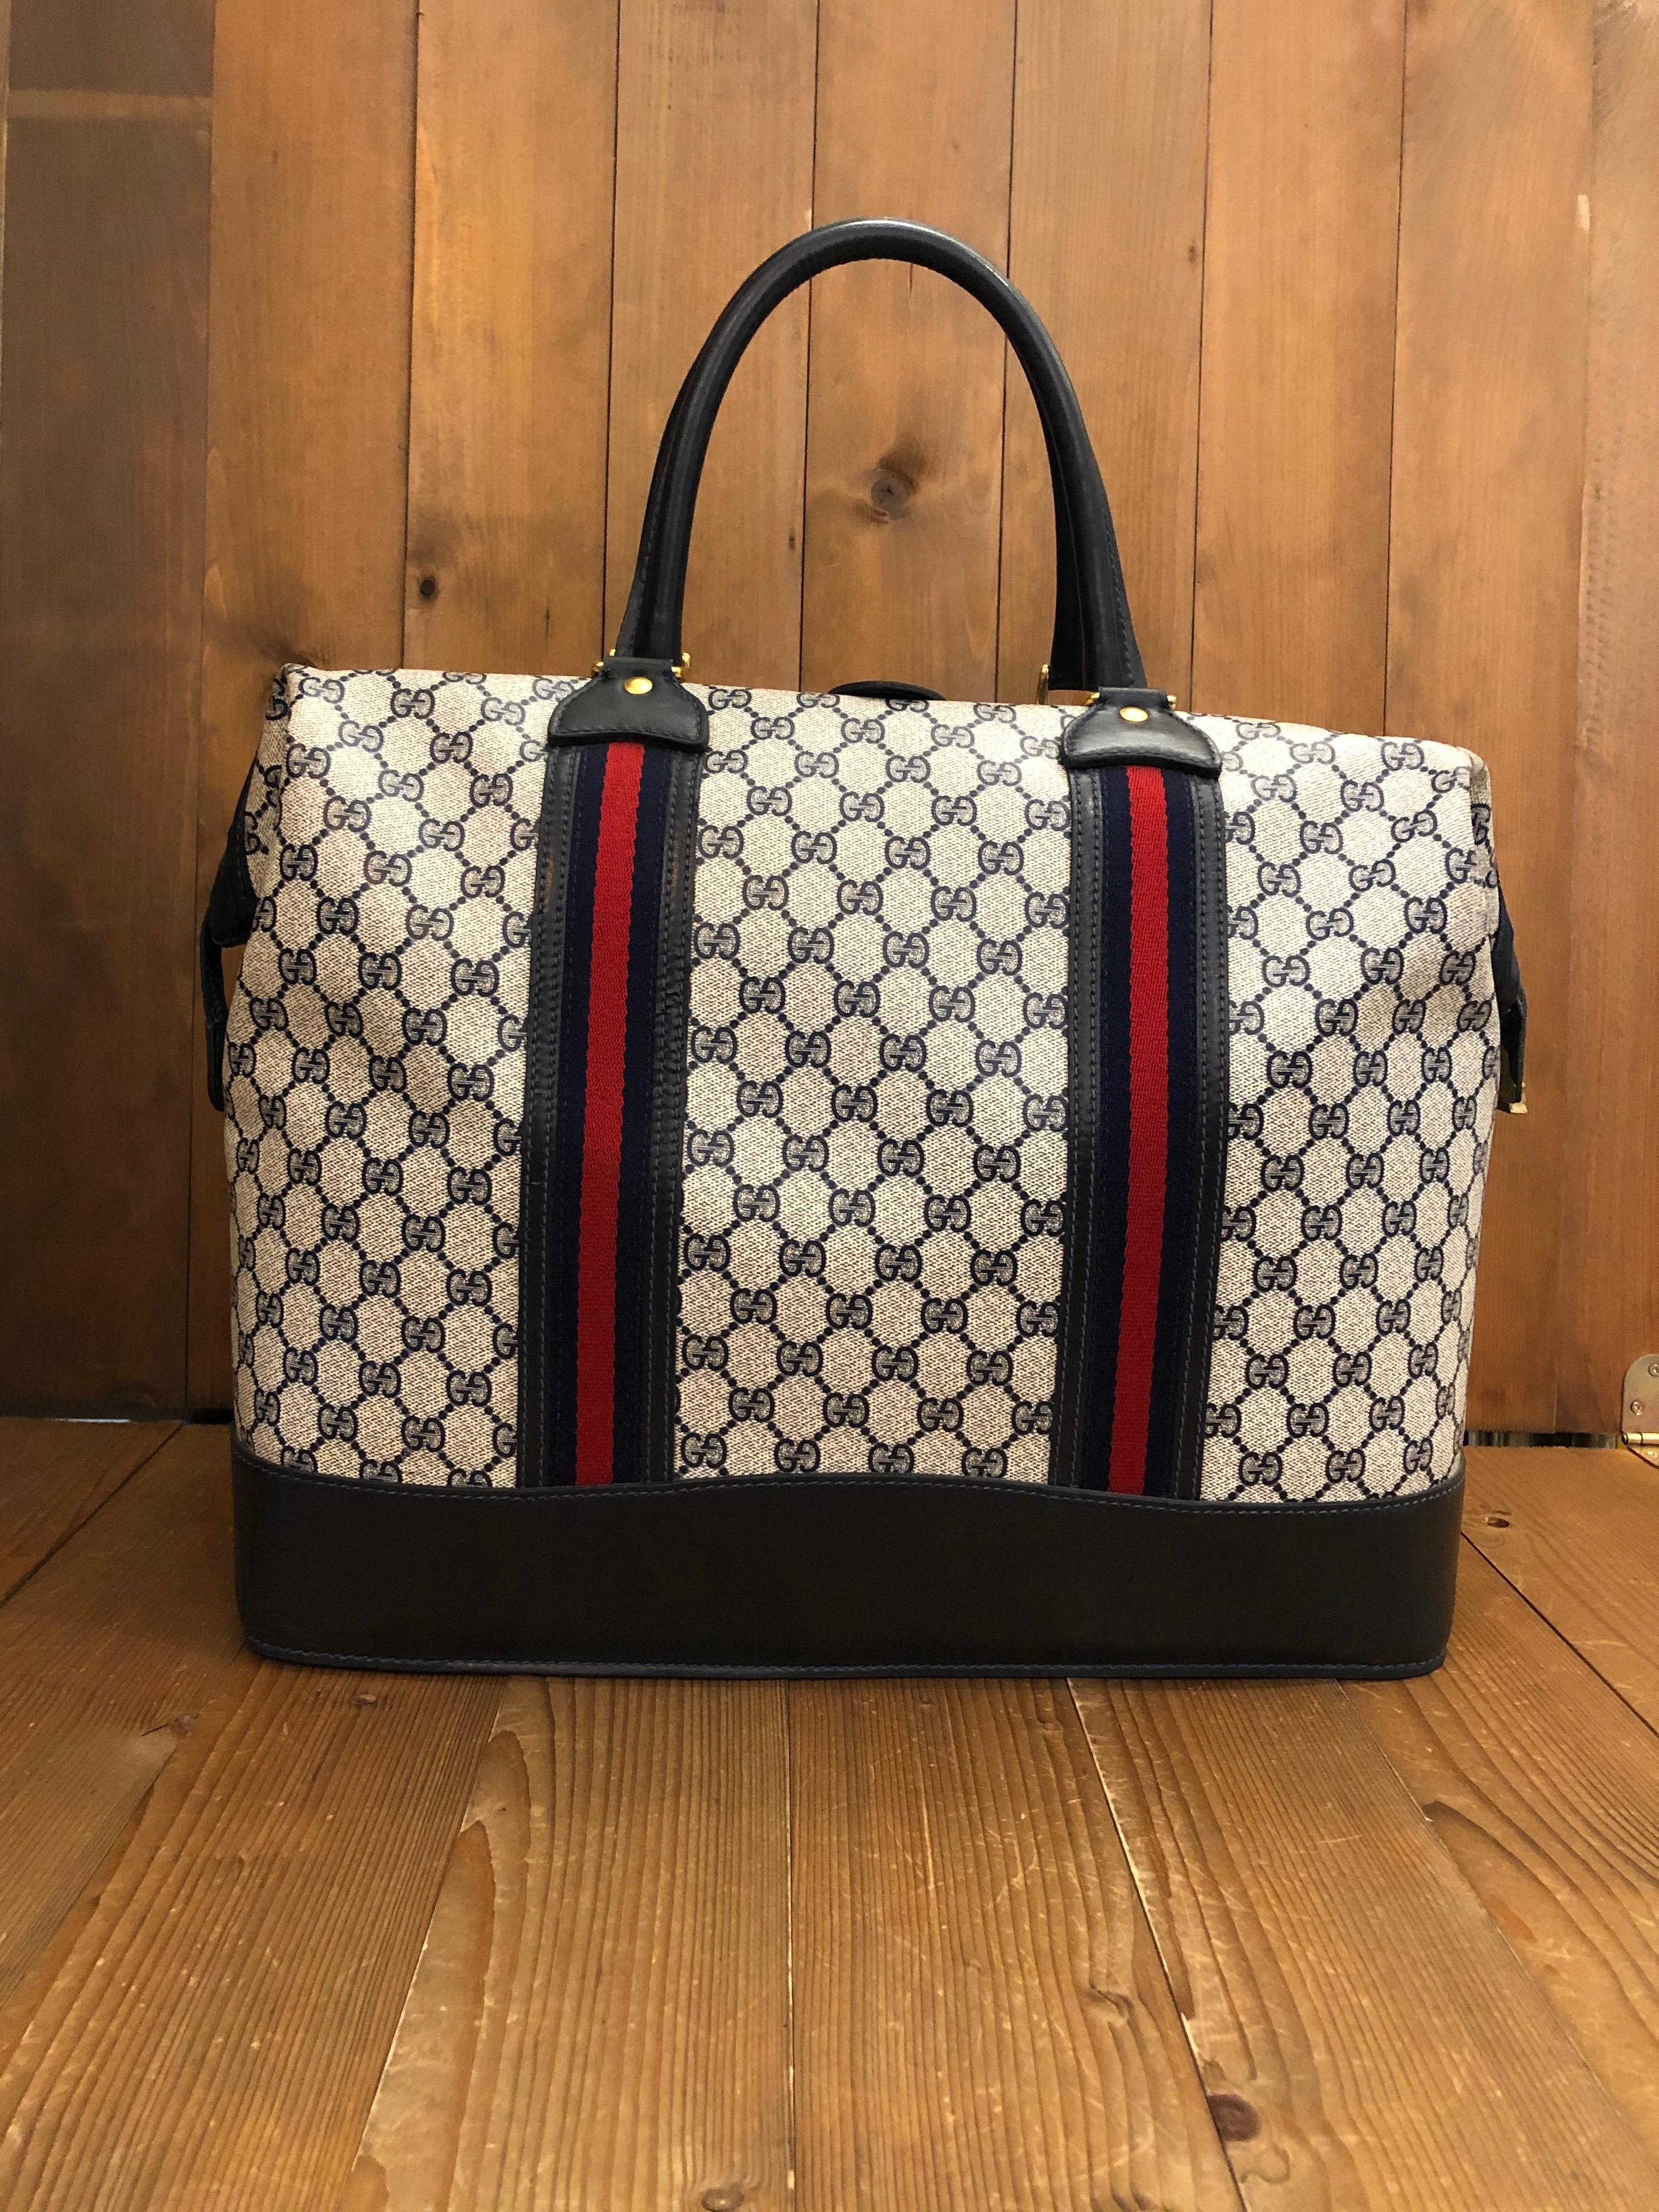 This rare Gucci Web doctor duffle in GG monogram coated canvas and leather from the 1970s era. 

Material: Monogram Canvas/Leather
Color: Navy
Origin: Italy
Measurements: approximately 17 x 13 x 9.5 inches

Condition: Minor marks on canvas and